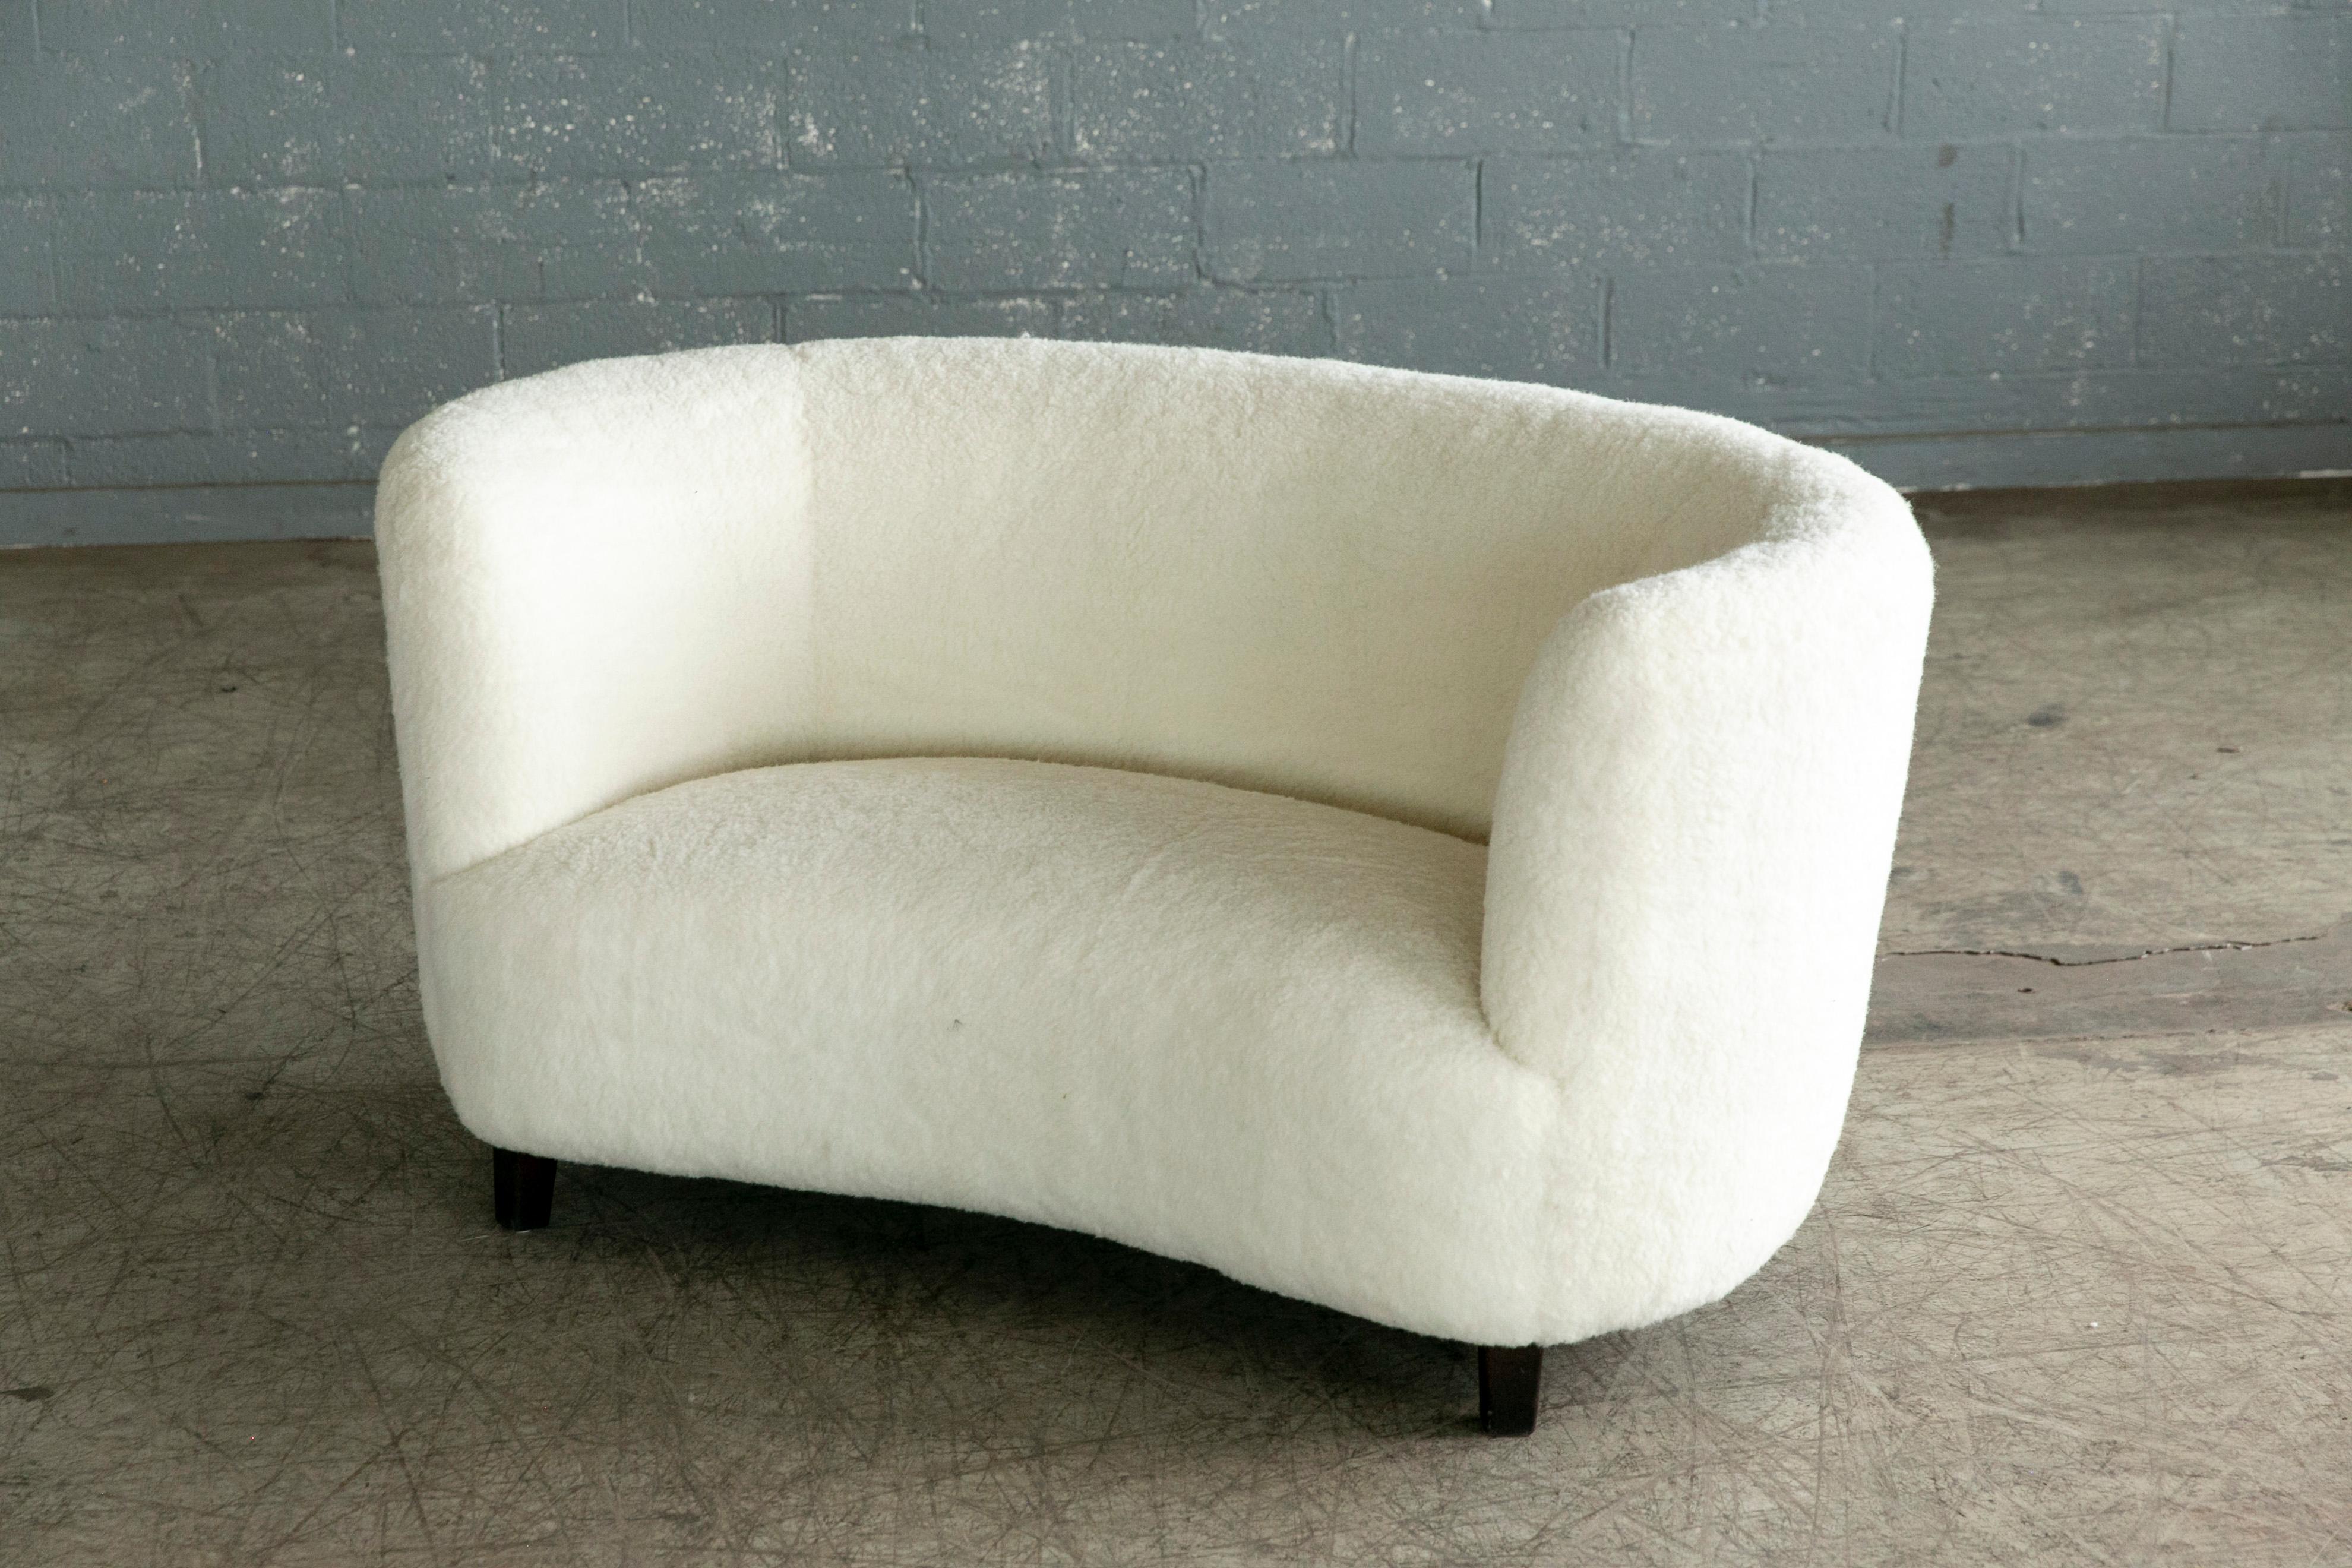 Wool Danish 1940's Banana Shaped Curved Loveseat or Sofa Covered in Lambswool